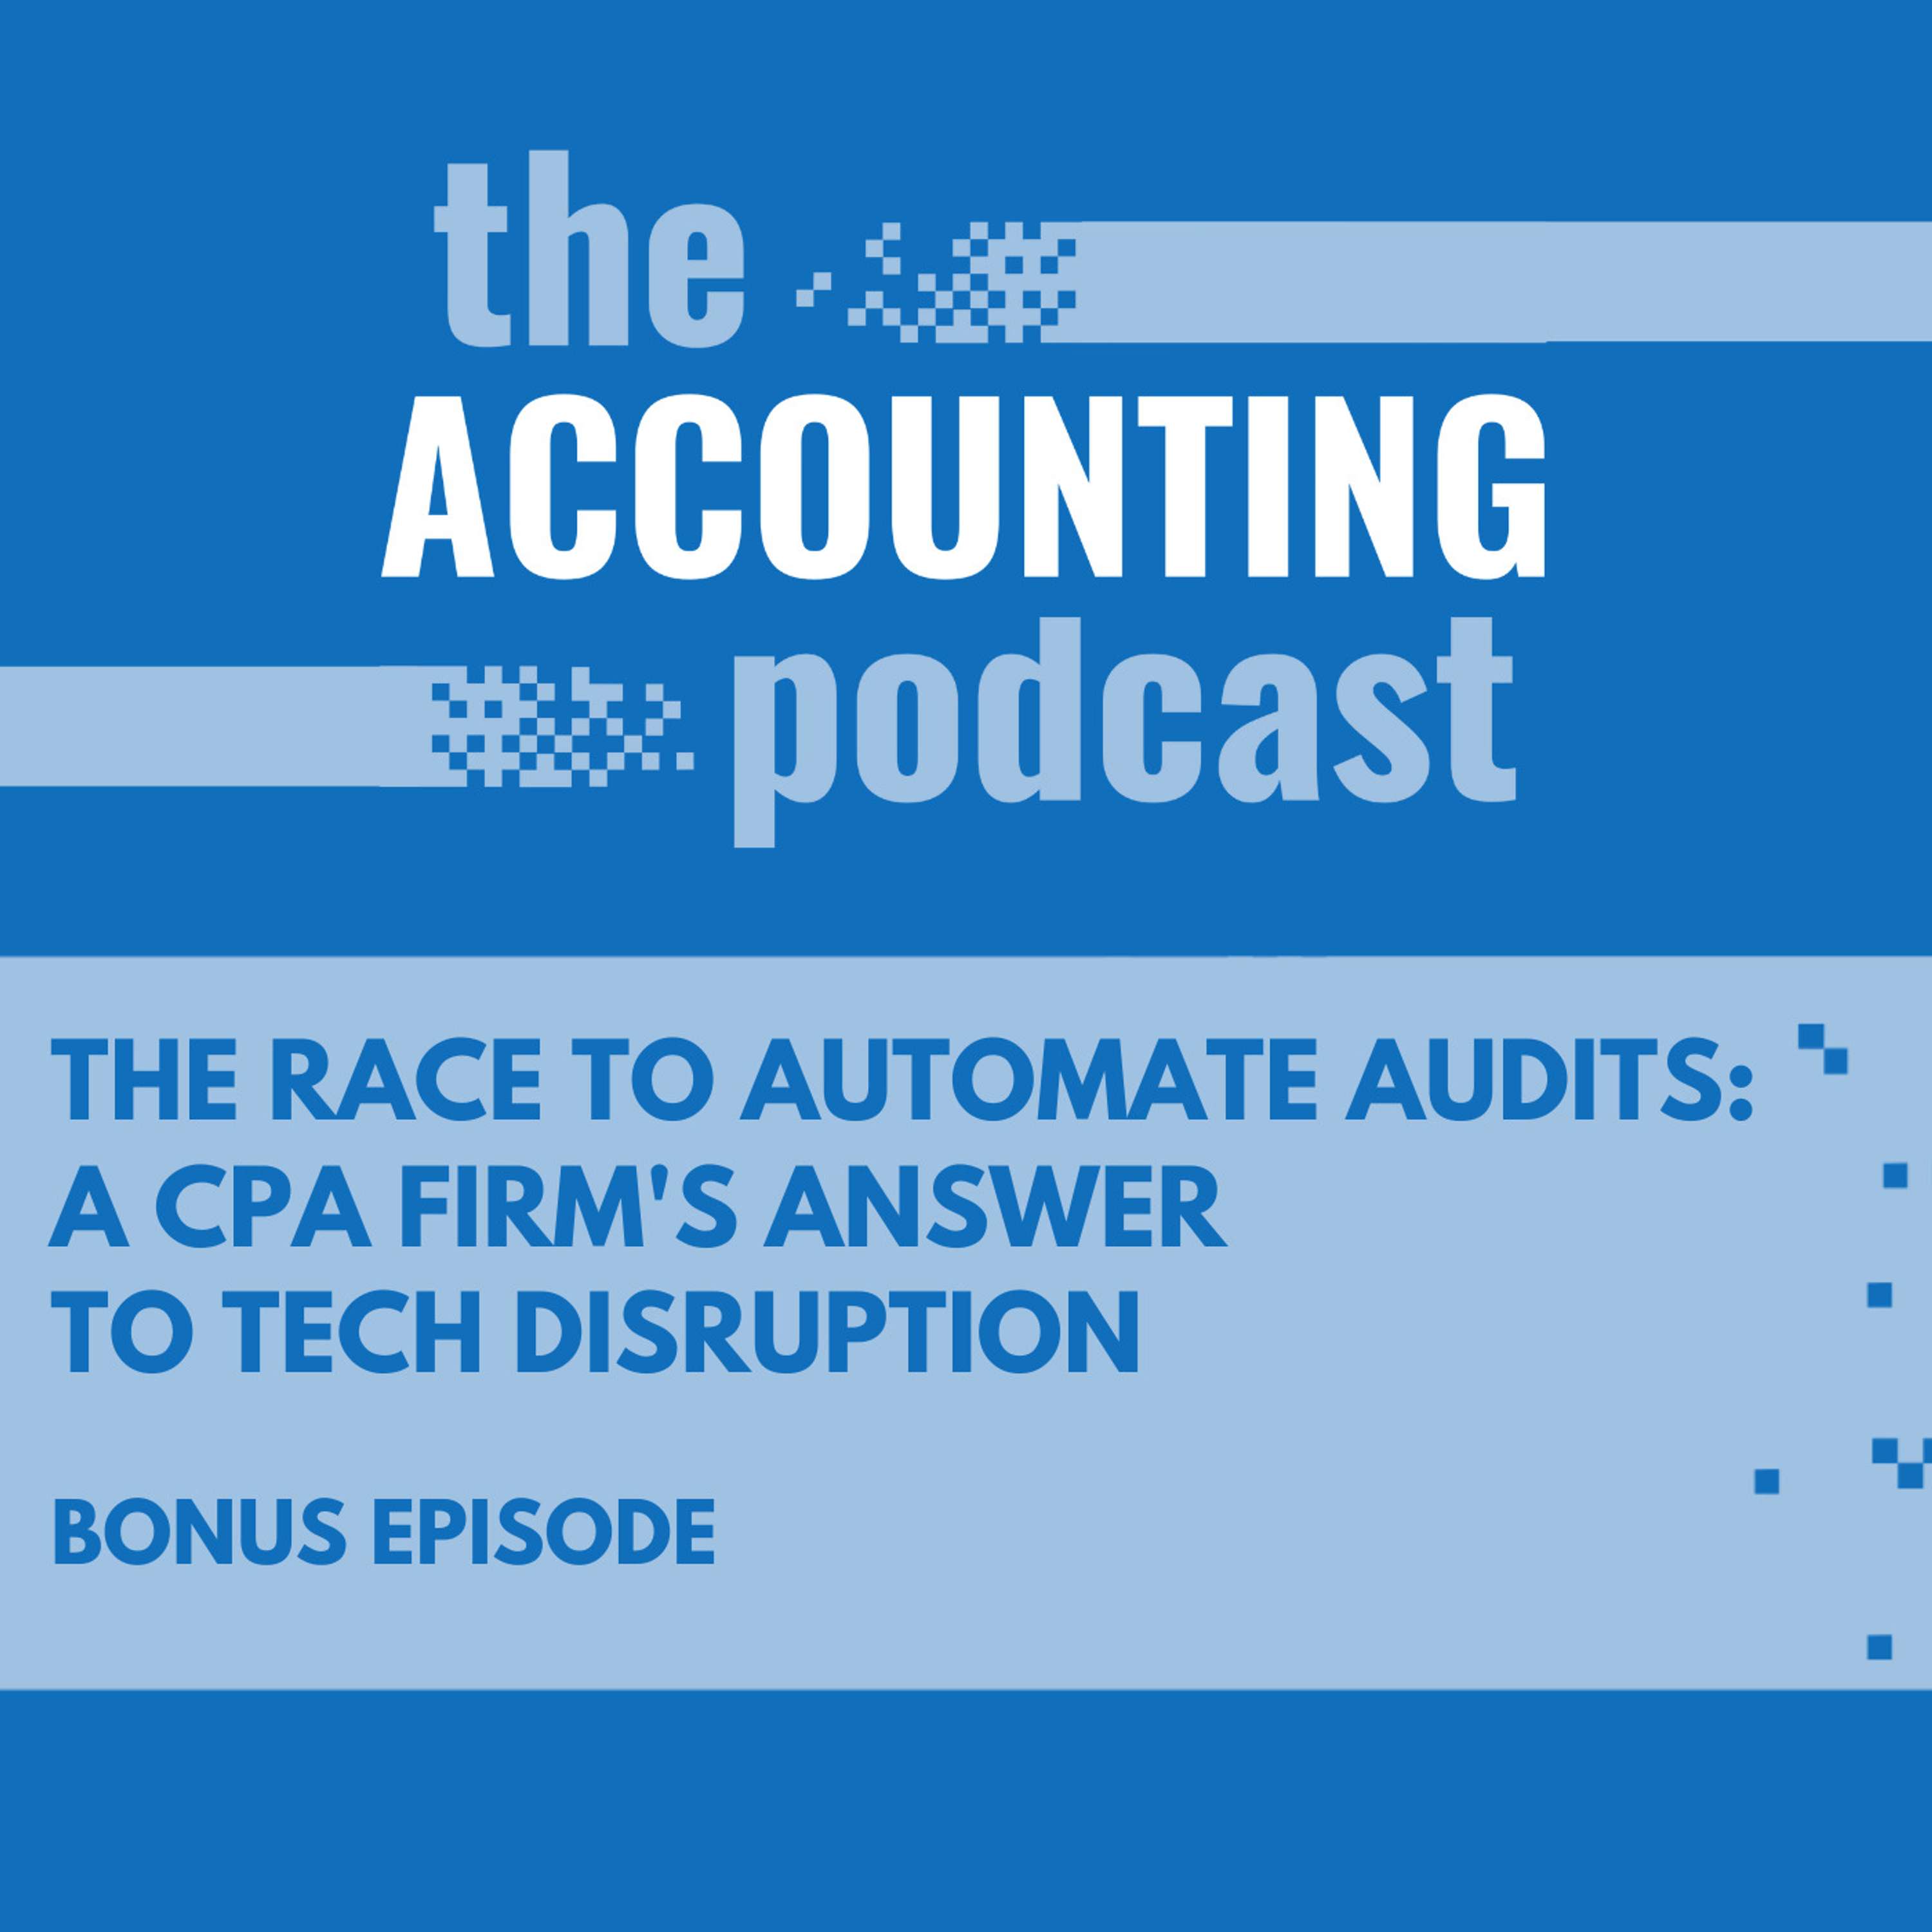 The Race to Automate Audits